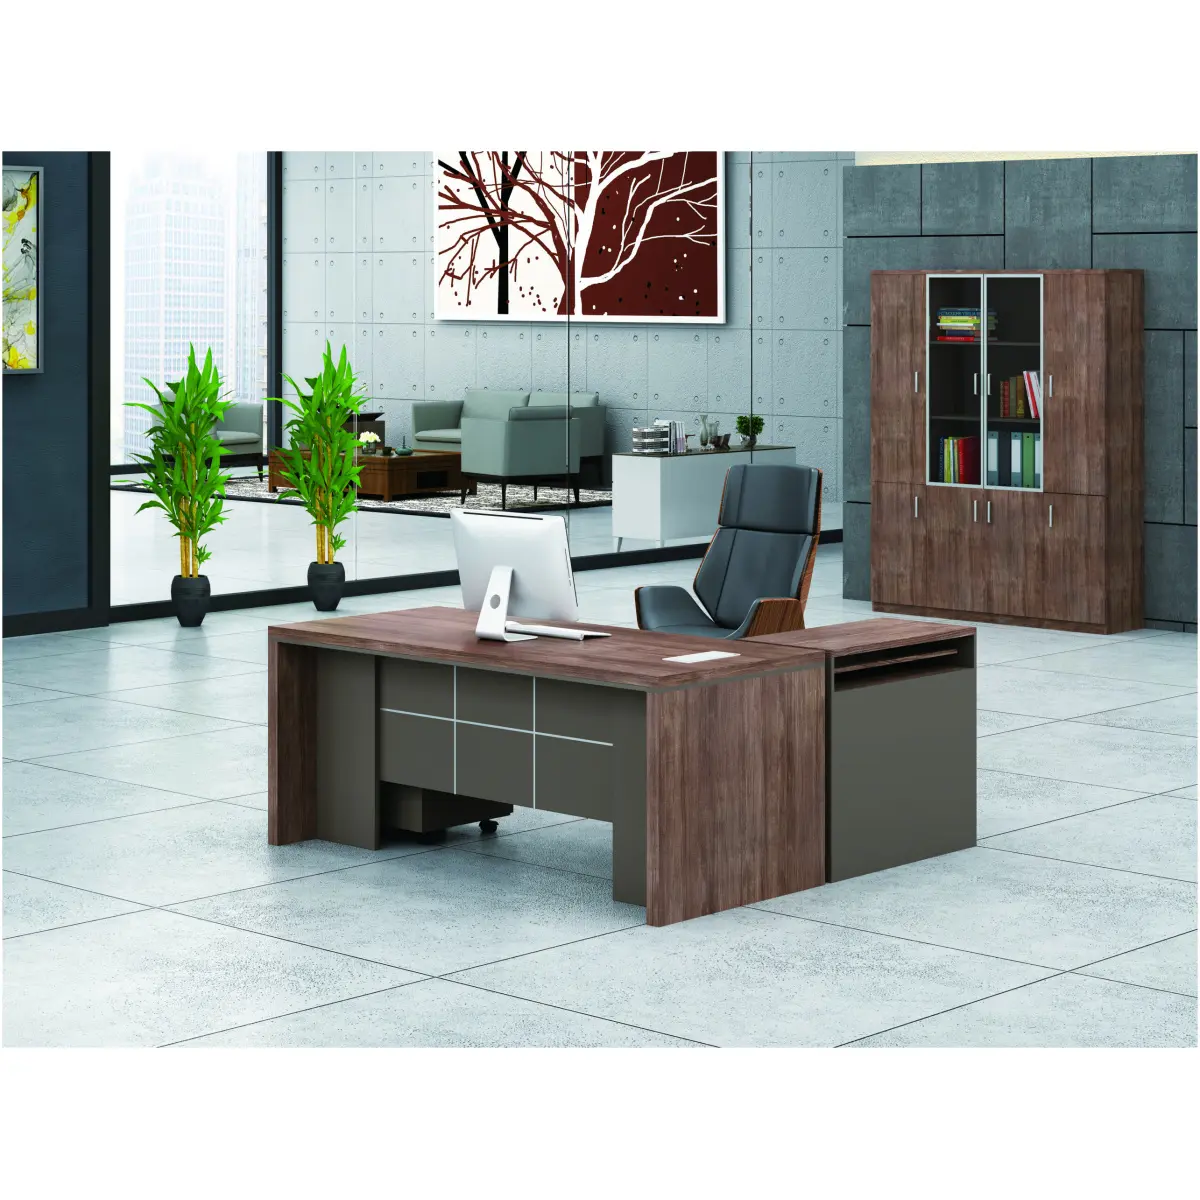 Office Table With Wooden Modesty Panel(BG380)